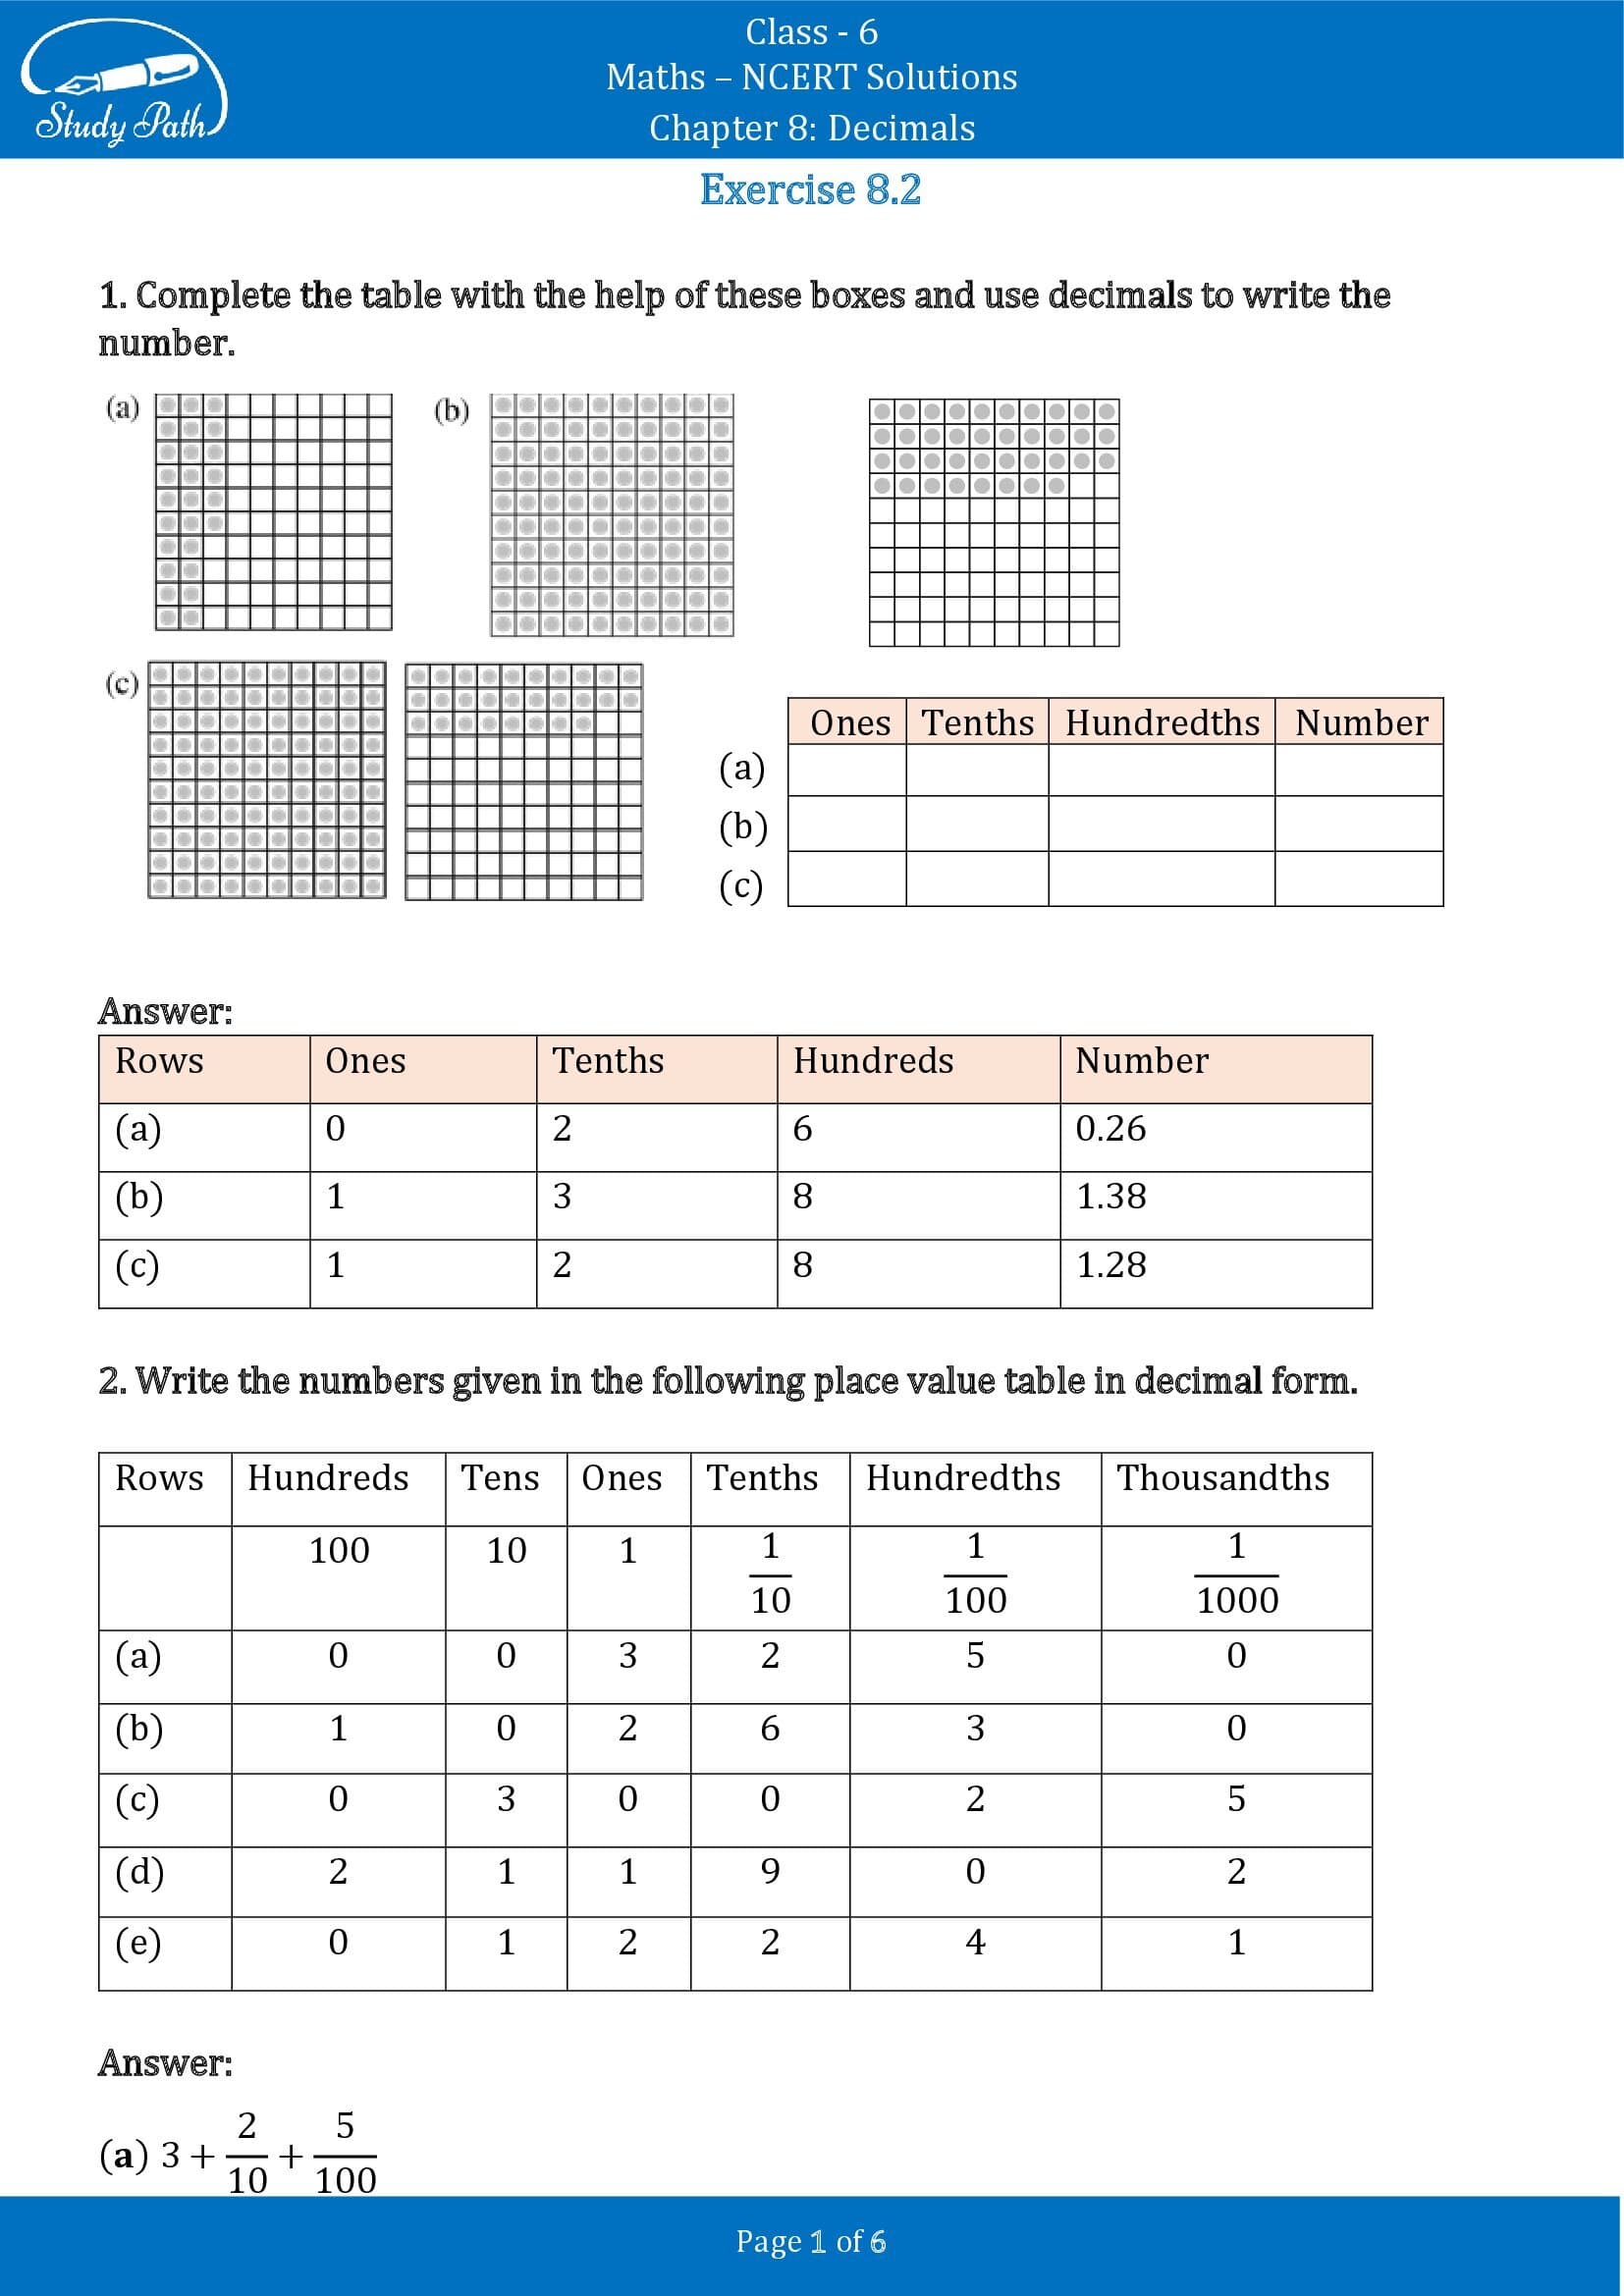 NCERT Solutions for Class 6 Maths Chapter 8 Decimals Exercise 8.2 00001